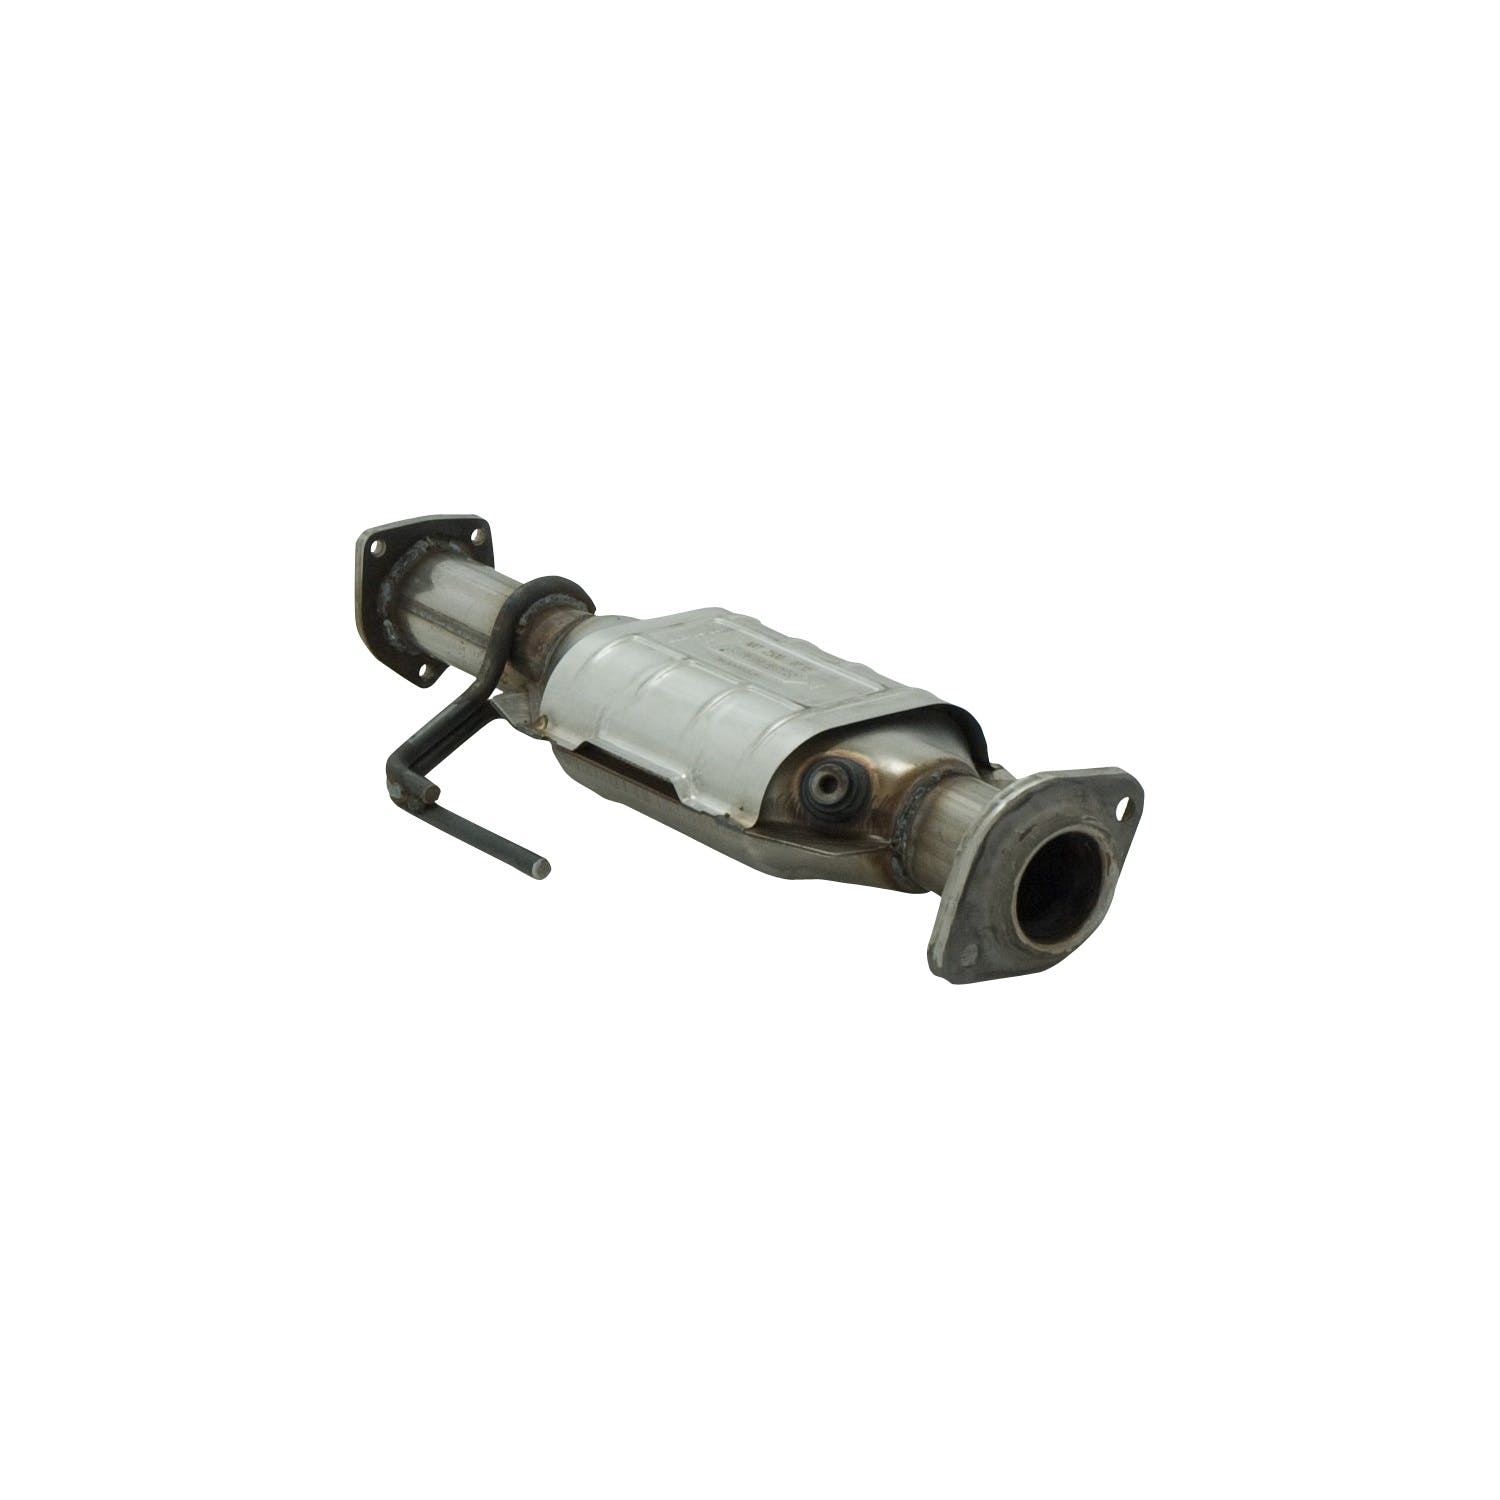 Flowmaster Catalytic Converters 2040006 Catalytic Converter-Direct Fit-2.50 in. Inlet 2.25 in. Outlet-49 State